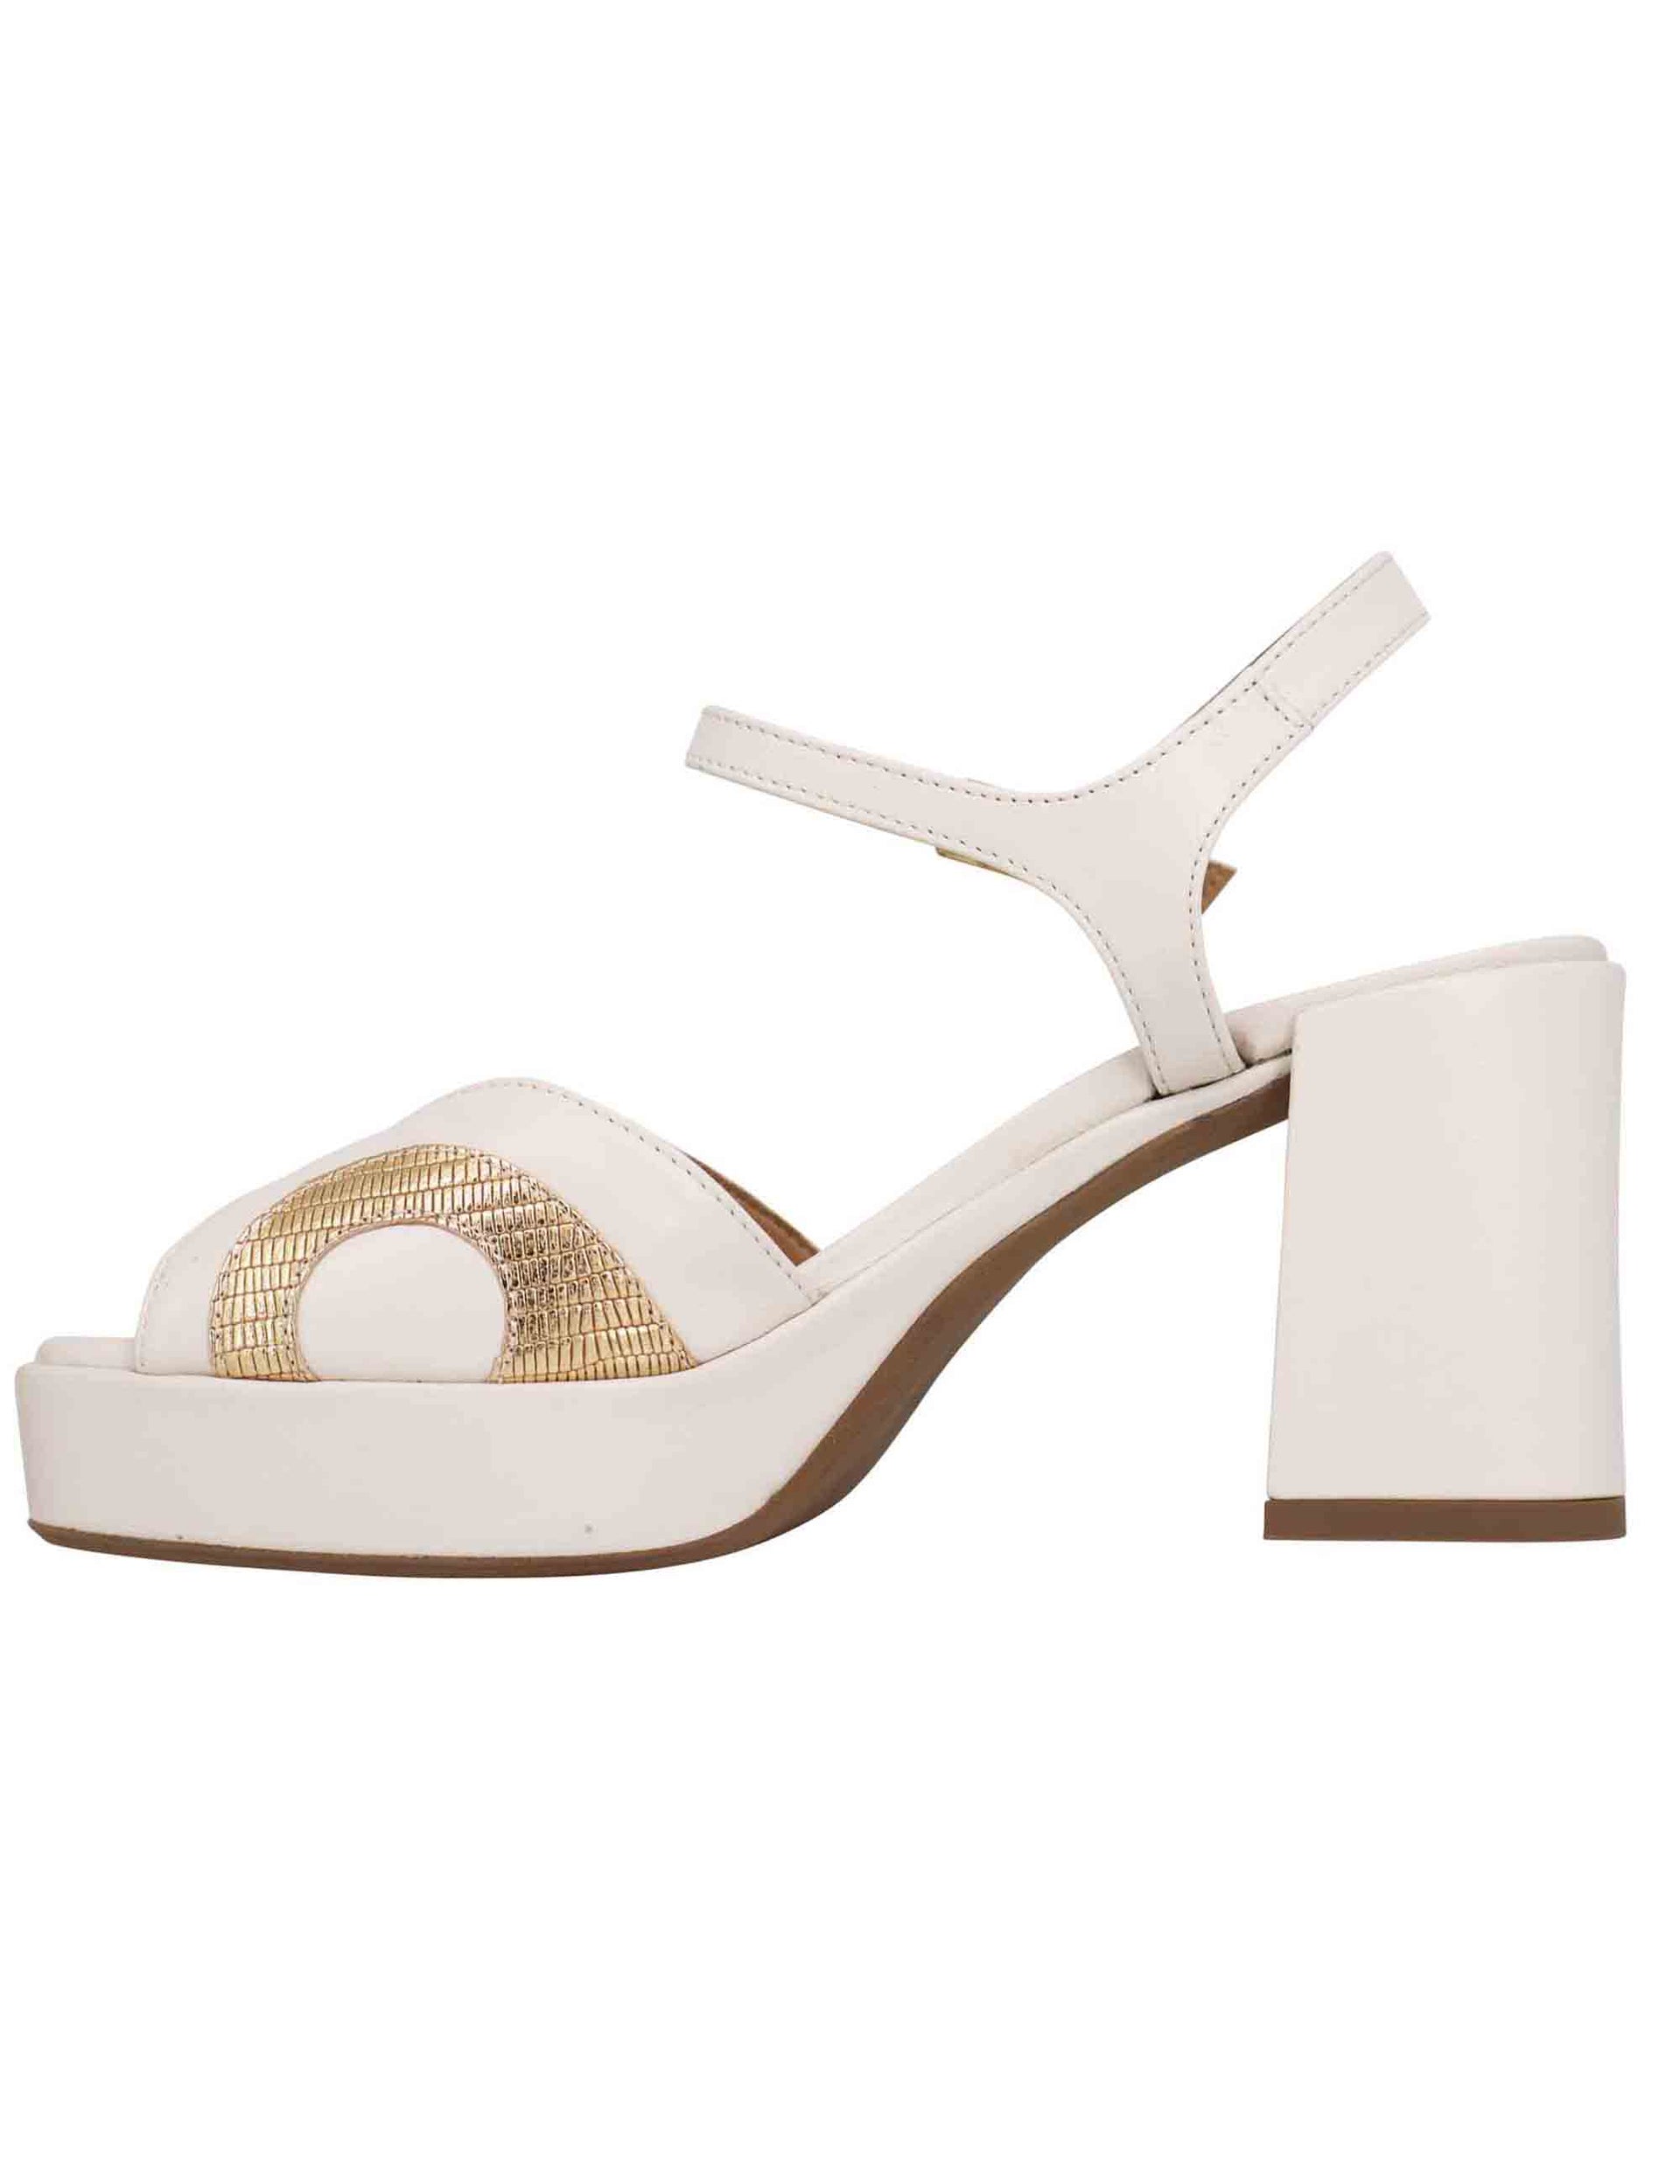 Women's white leather sandals with ankle strap, heel and plateau